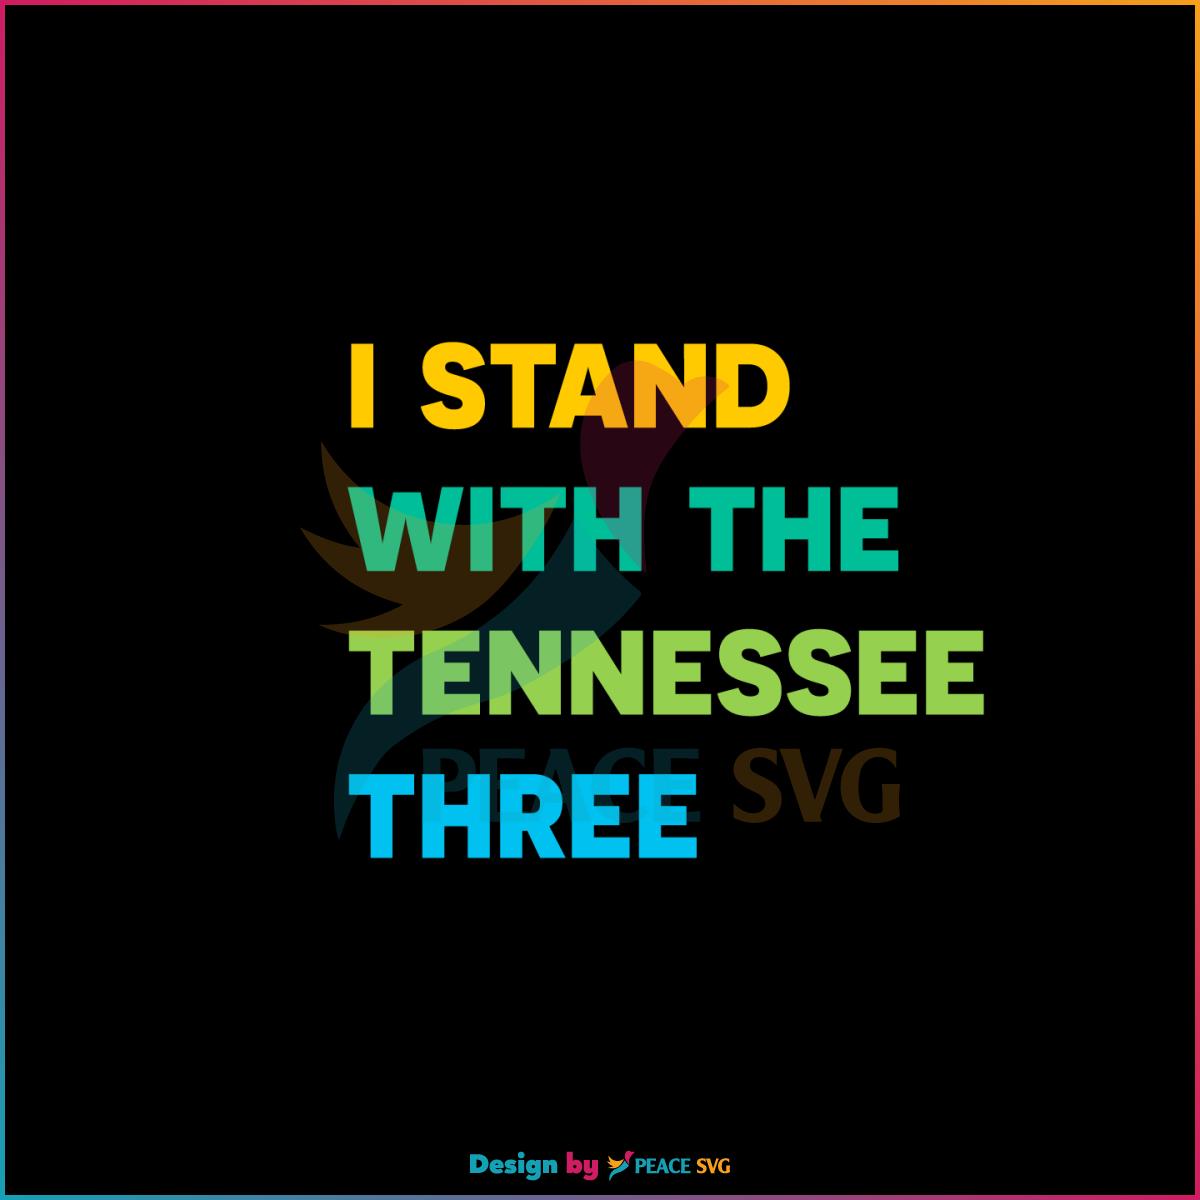 I Stand With The Tennessee Three SVG Support Of The Tennessee Three SVG